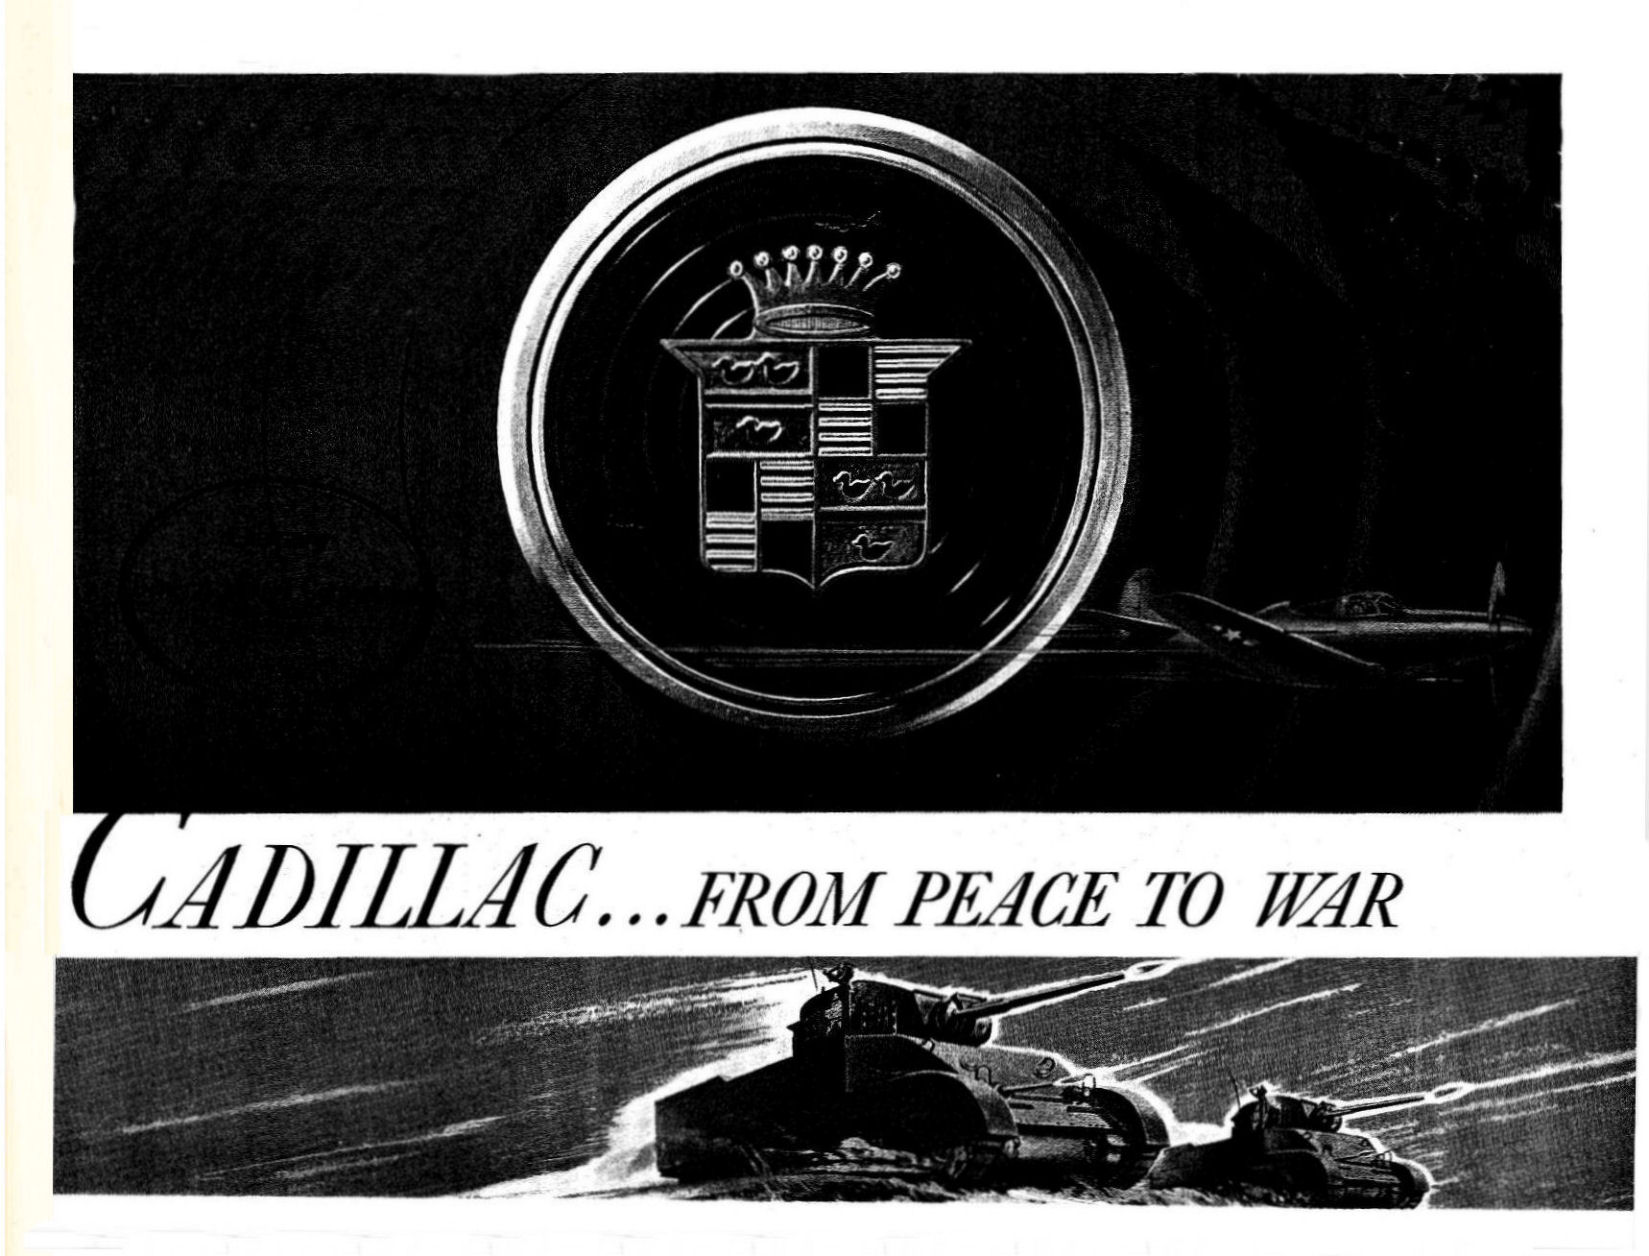 1943-Cadillac_From_Peace_to_War-01